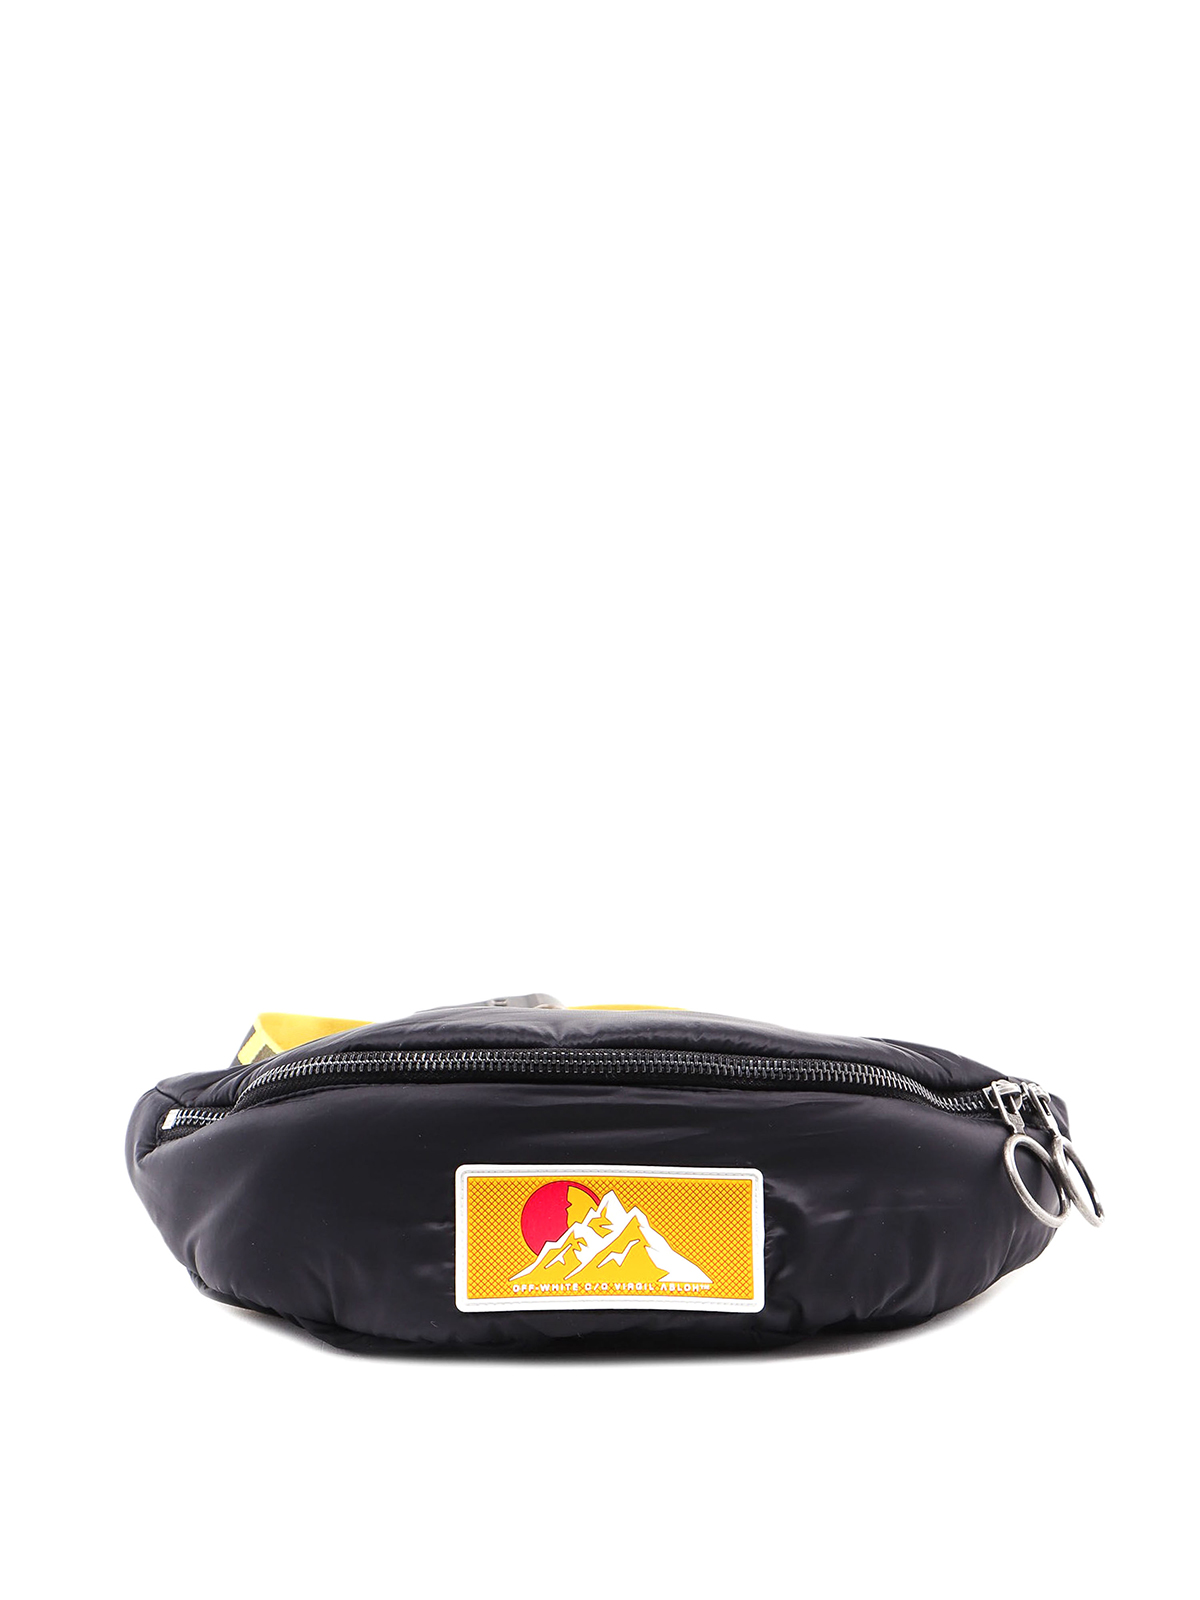 OFF-WHITE INDUSTRIAL NYLON FANNY PACK